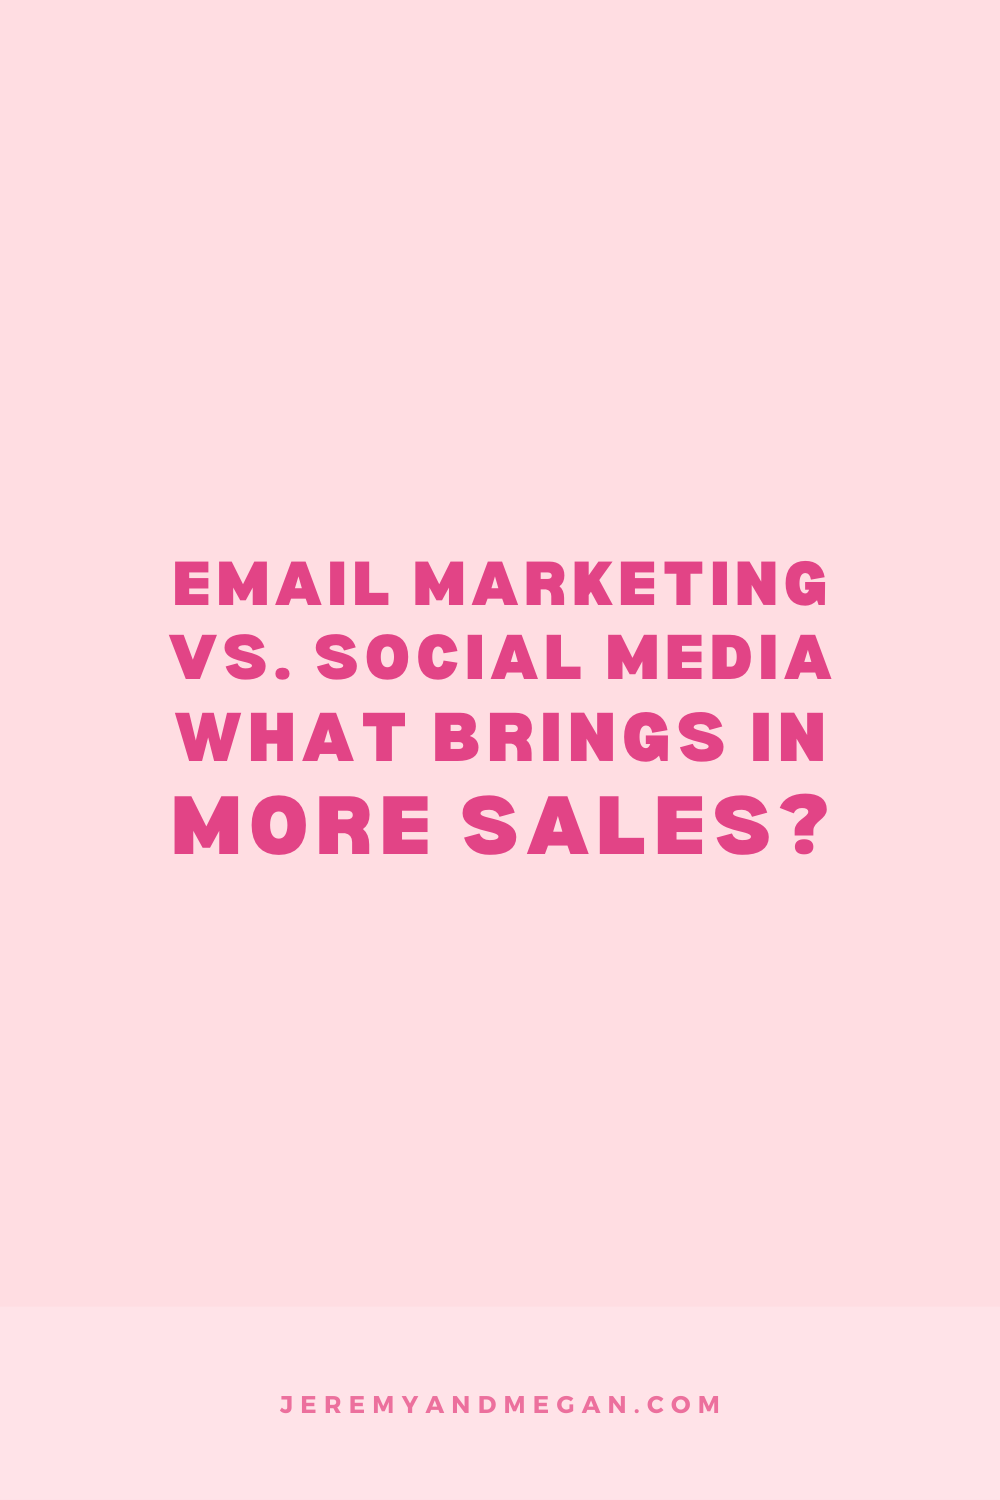 Email Marketing vs. Social Media: What Brings in More Sales? Megan Martin breaks down the history of emails and social media for sales